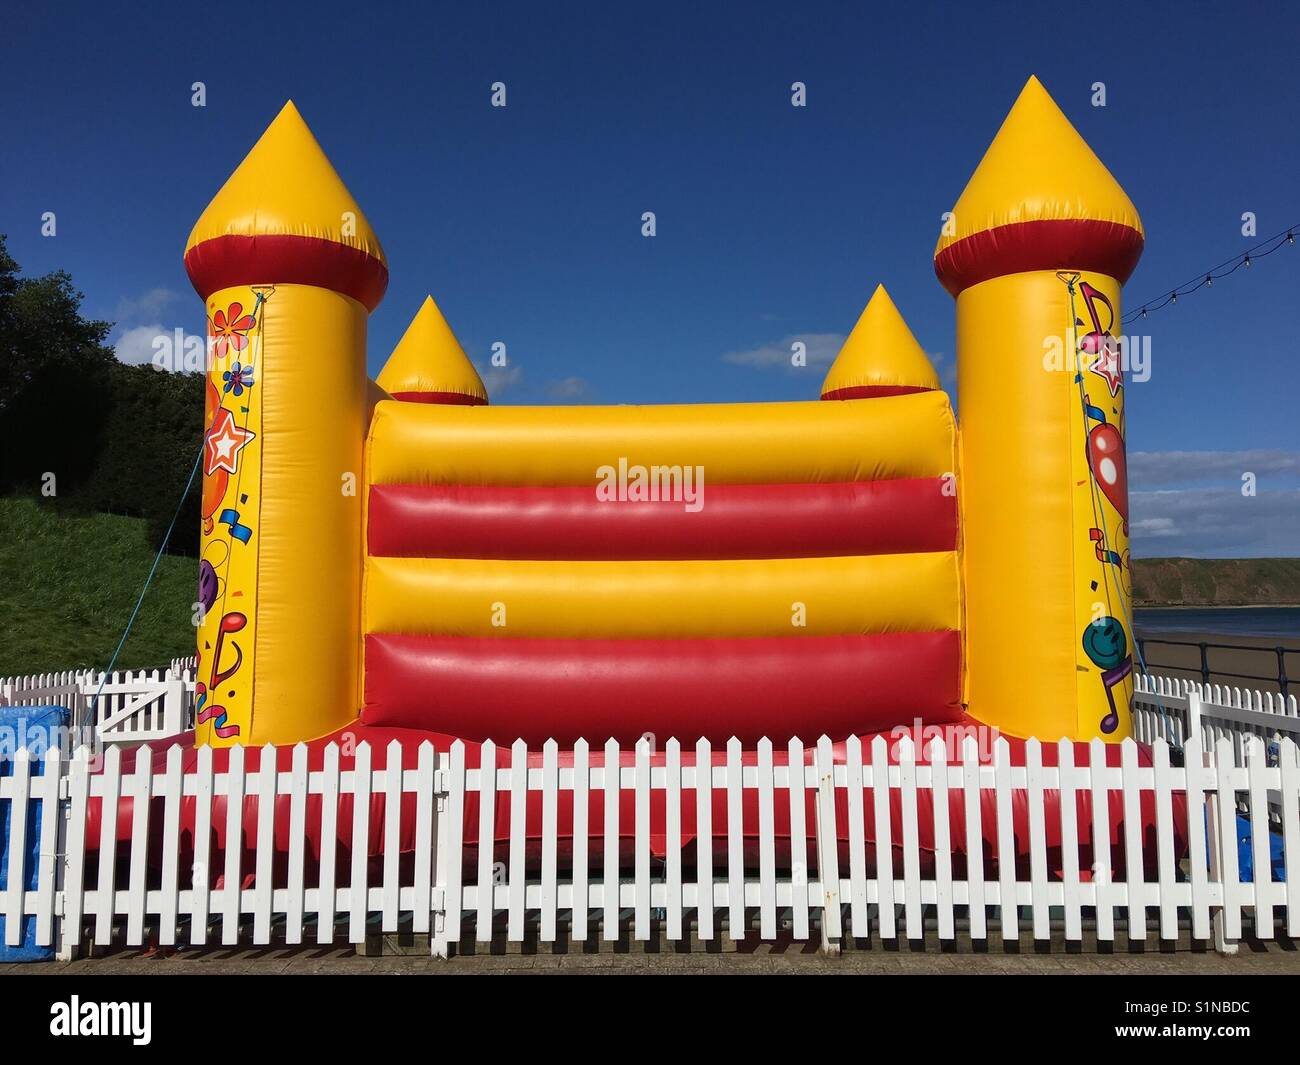 Red and yellow inflated bouncy castle Stock Photo - Alamy